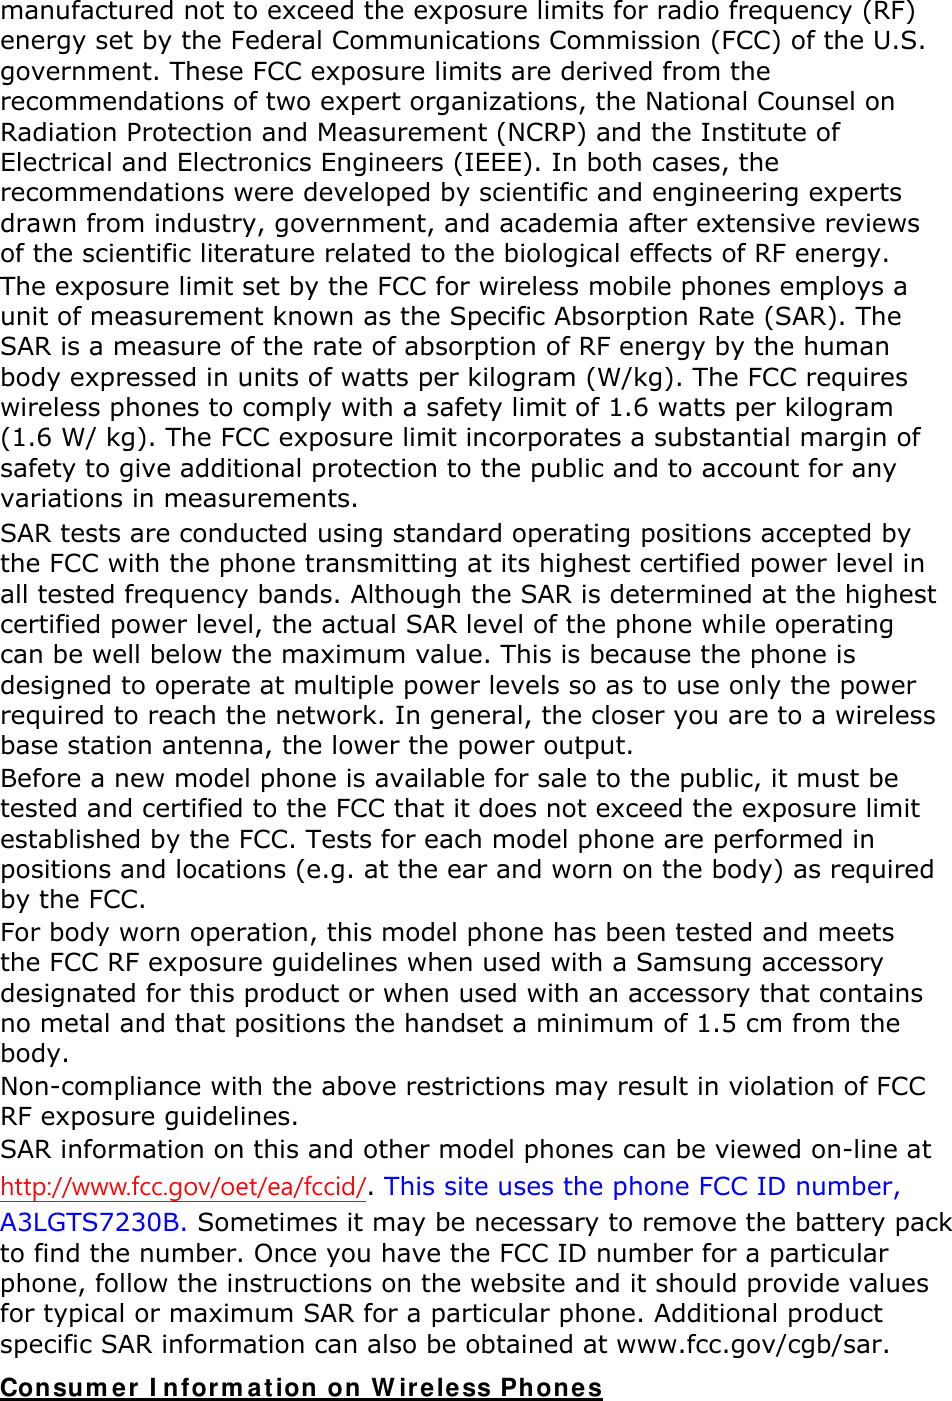 manufactured not to exceed the exposure limits for radio frequency (RF) energy set by the Federal Communications Commission (FCC) of the U.S. government. These FCC exposure limits are derived from the recommendations of two expert organizations, the National Counsel on Radiation Protection and Measurement (NCRP) and the Institute of Electrical and Electronics Engineers (IEEE). In both cases, the recommendations were developed by scientific and engineering experts drawn from industry, government, and academia after extensive reviews of the scientific literature related to the biological effects of RF energy. The exposure limit set by the FCC for wireless mobile phones employs a unit of measurement known as the Specific Absorption Rate (SAR). The SAR is a measure of the rate of absorption of RF energy by the human body expressed in units of watts per kilogram (W/kg). The FCC requires wireless phones to comply with a safety limit of 1.6 watts per kilogram (1.6 W/ kg). The FCC exposure limit incorporates a substantial margin of safety to give additional protection to the public and to account for any variations in measurements. SAR tests are conducted using standard operating positions accepted by the FCC with the phone transmitting at its highest certified power level in all tested frequency bands. Although the SAR is determined at the highest certified power level, the actual SAR level of the phone while operating can be well below the maximum value. This is because the phone is designed to operate at multiple power levels so as to use only the power required to reach the network. In general, the closer you are to a wireless base station antenna, the lower the power output. Before a new model phone is available for sale to the public, it must be tested and certified to the FCC that it does not exceed the exposure limit established by the FCC. Tests for each model phone are performed in positions and locations (e.g. at the ear and worn on the body) as required by the FCC.     For body worn operation, this model phone has been tested and meets the FCC RF exposure guidelines when used with a Samsung accessory designated for this product or when used with an accessory that contains no metal and that positions the handset a minimum of 1.5 cm from the body.  Non-compliance with the above restrictions may result in violation of FCC RF exposure guidelines. SAR information on this and other model phones can be viewed on-line at http://www.fcc.gov/oet/ea/fccid/. This site uses the phone FCC ID number, A3LGTS7230B. Sometimes it may be necessary to remove the battery pack to find the number. Once you have the FCC ID number for a particular phone, follow the instructions on the website and it should provide values for typical or maximum SAR for a particular phone. Additional product specific SAR information can also be obtained at www.fcc.gov/cgb/sar. Consumer Information on Wireless Phones 